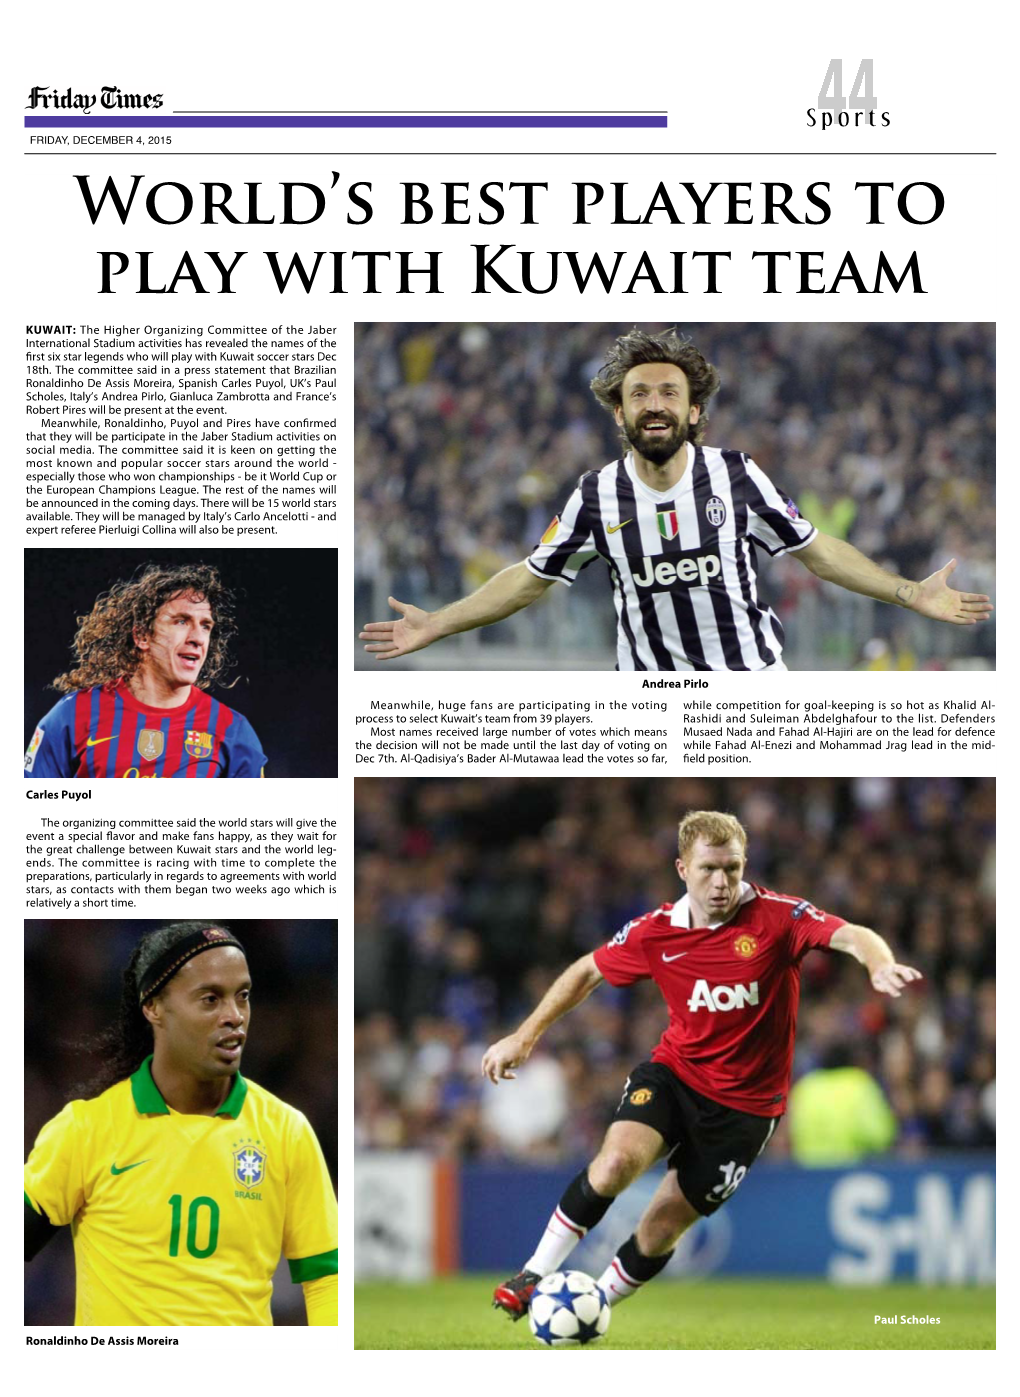 World's Best Players to Play with Kuwait Team